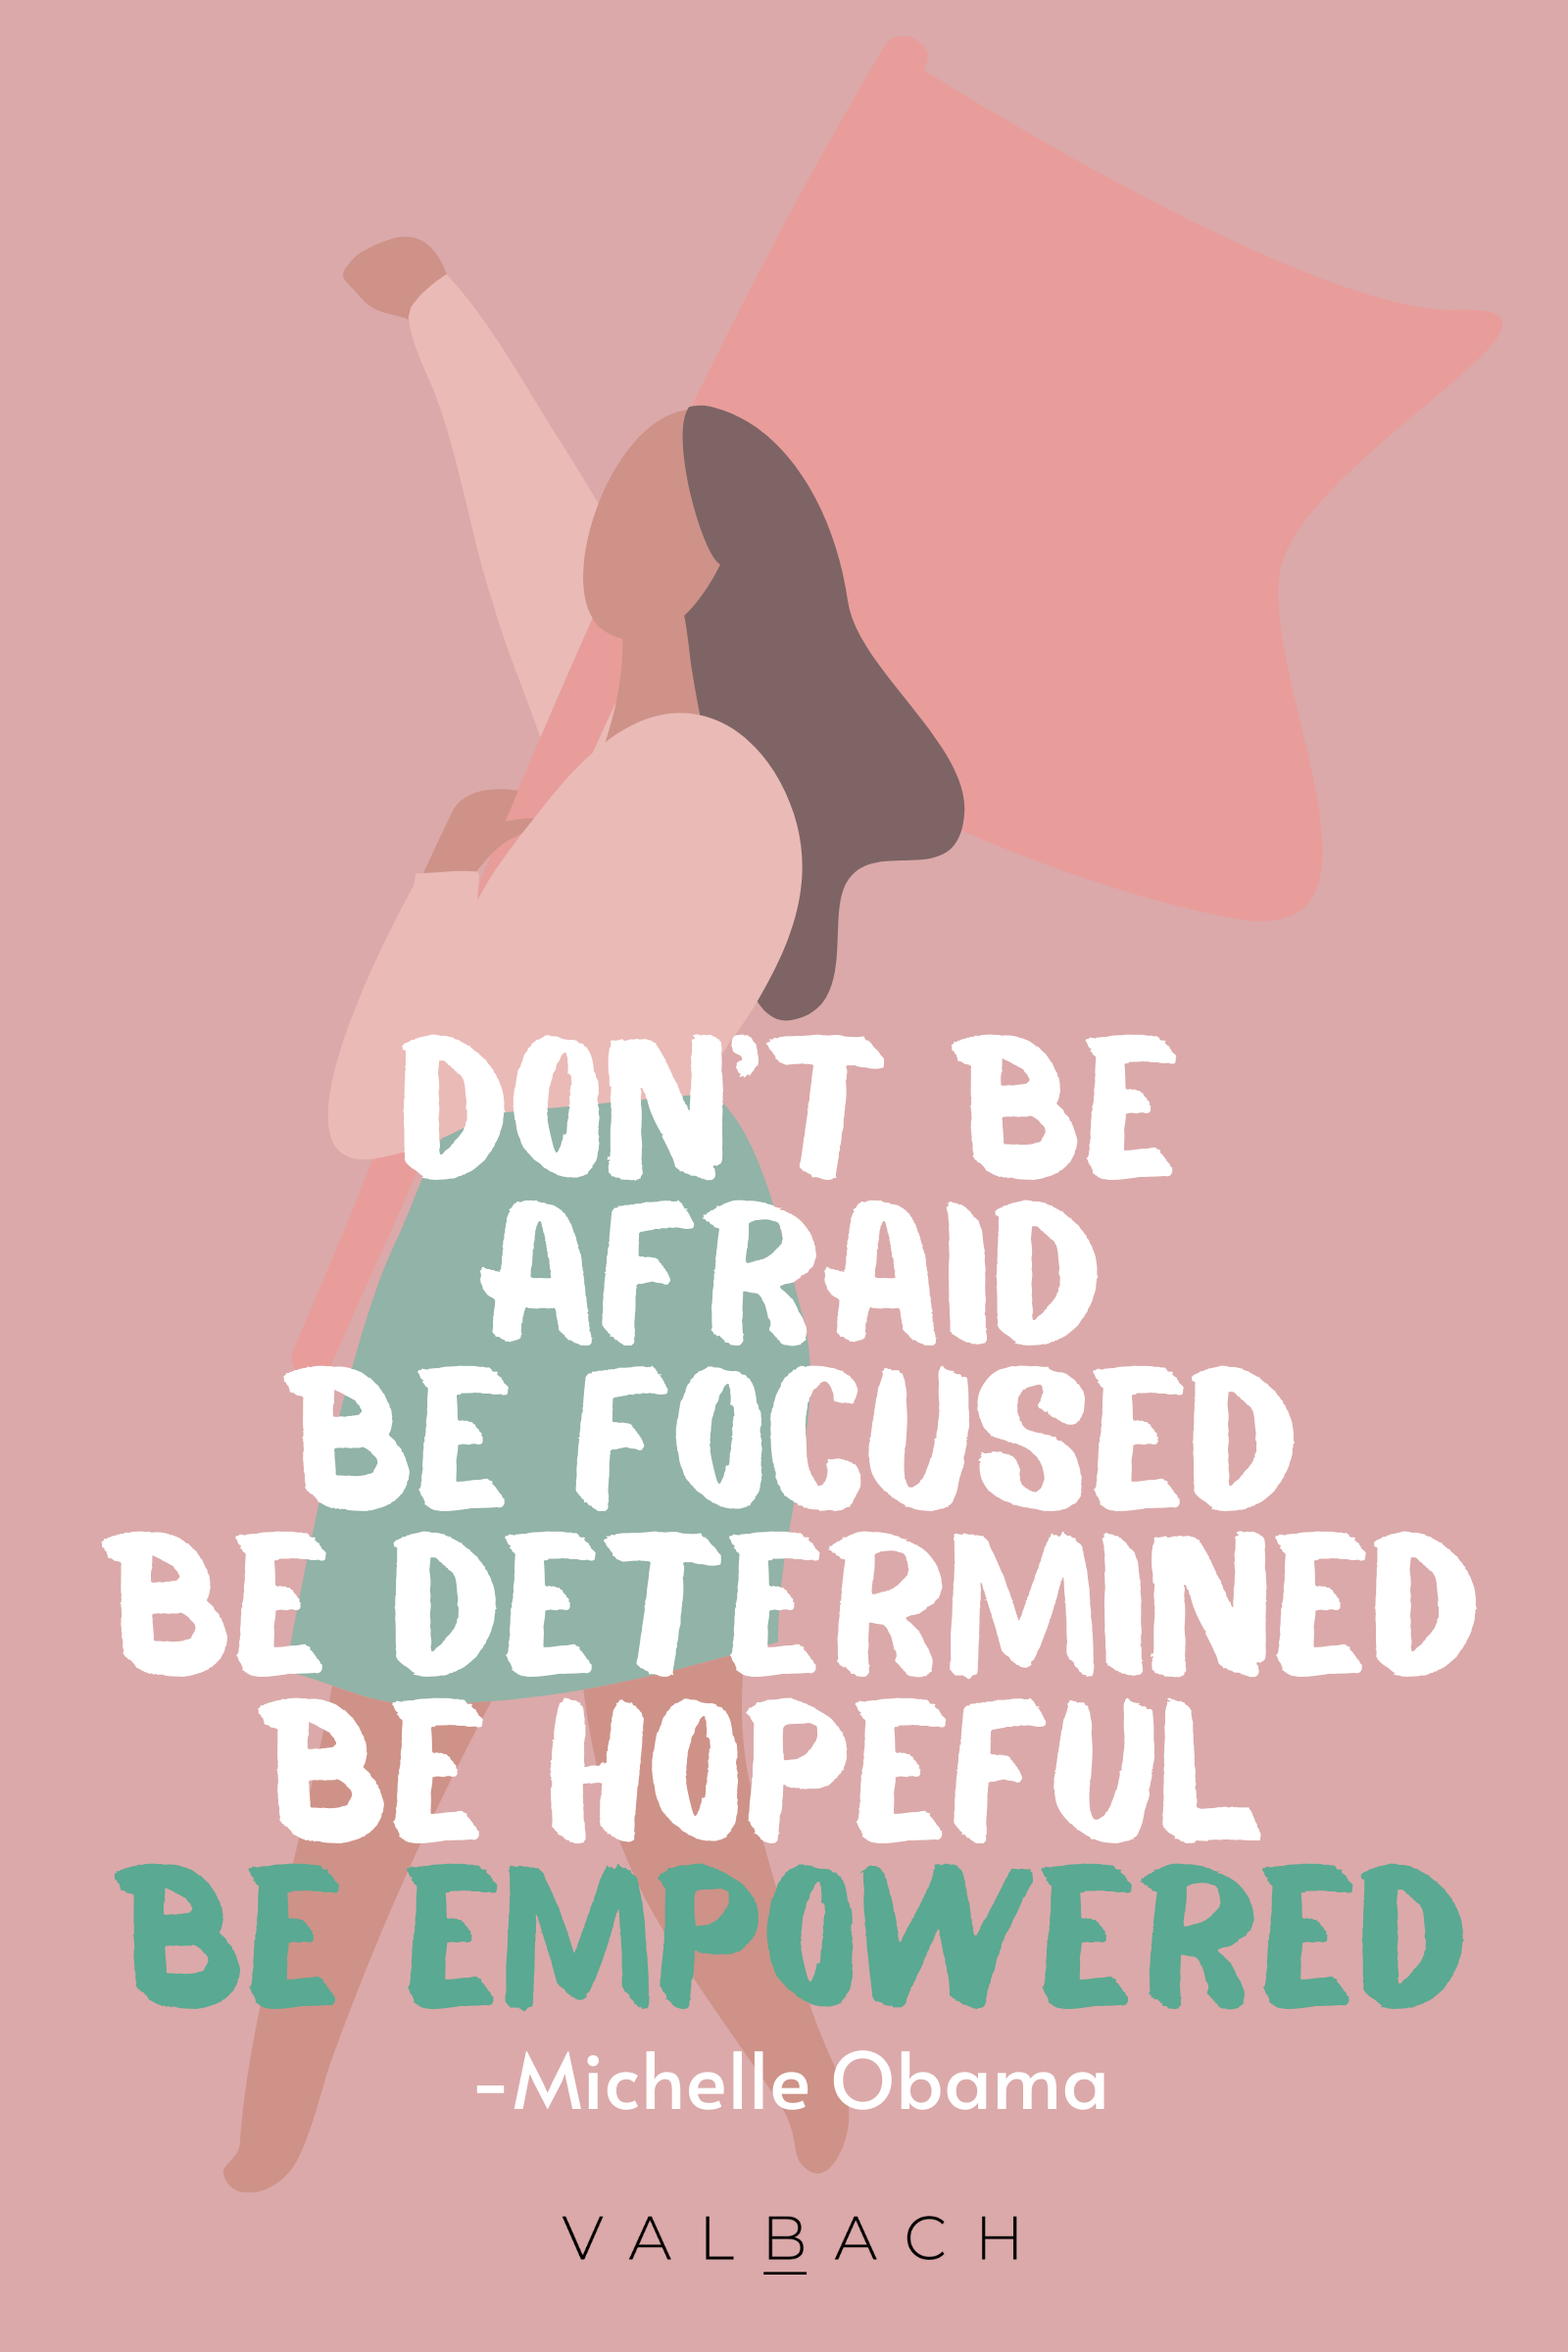 Inspirational Women Of The Week + Free Inspirational iPhone Wallpaper. Obama quote, Empowering women quotes, Empowering quotes